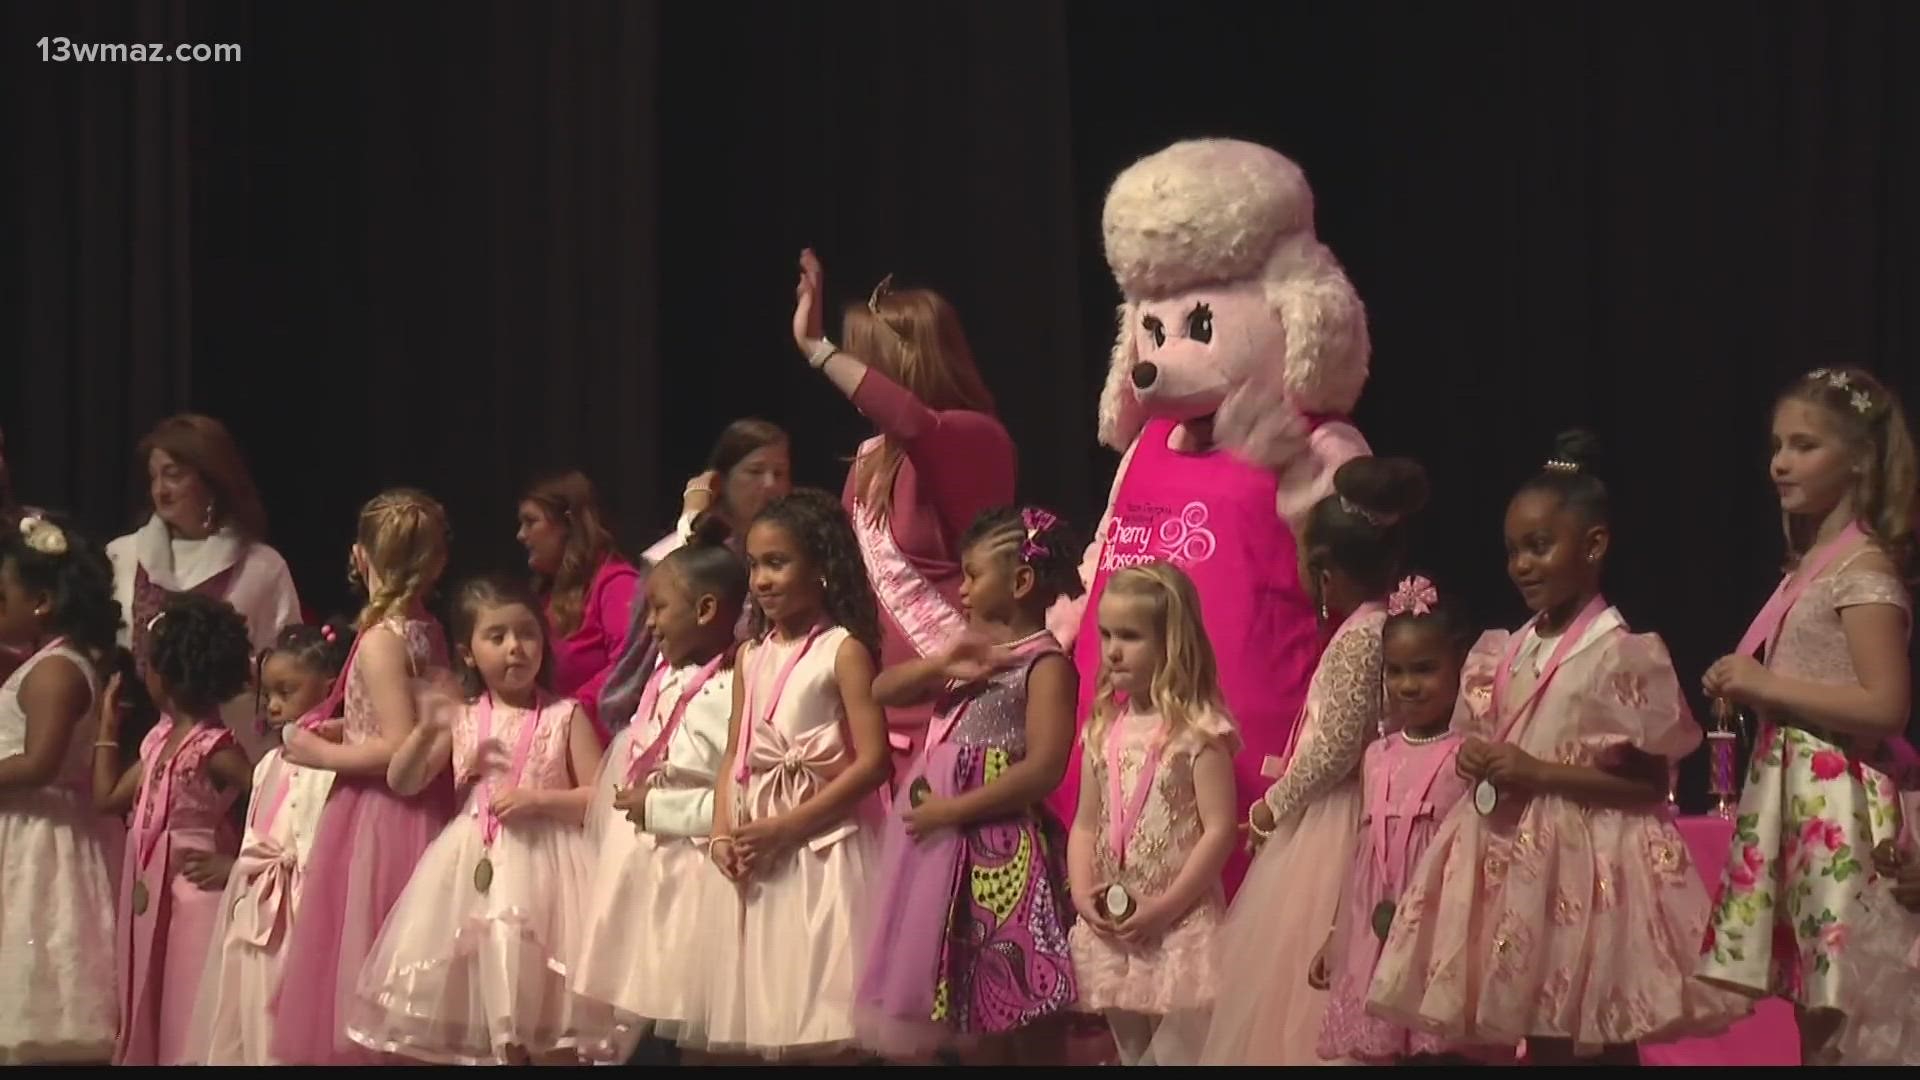 Ahead of the pinkest party on earth, the cherry blossom festival selected their little Mr. and Miss. Cherry Blossom.